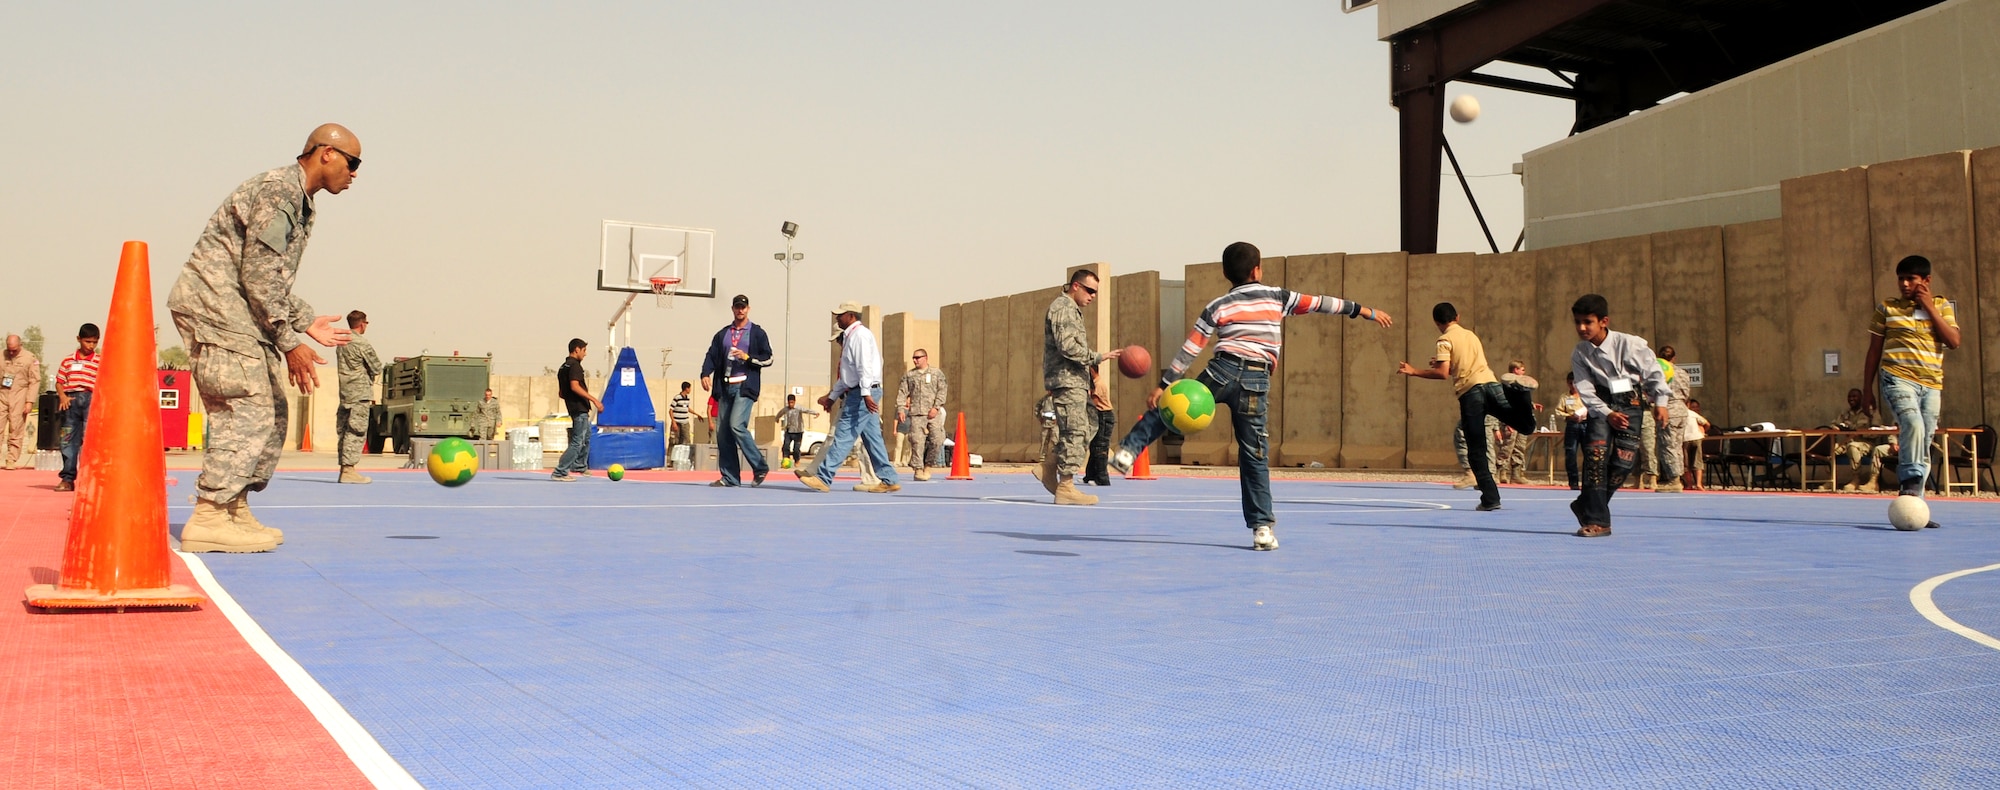 JOINT BASE BALAD, Iraq -- Servicemembers play sports with local children at the H-6 recreation center during Iraqi Kids Day here Oct. 10, 2009. (U.S. Air Force photo/Staff Sgt. Heather M. Norris)